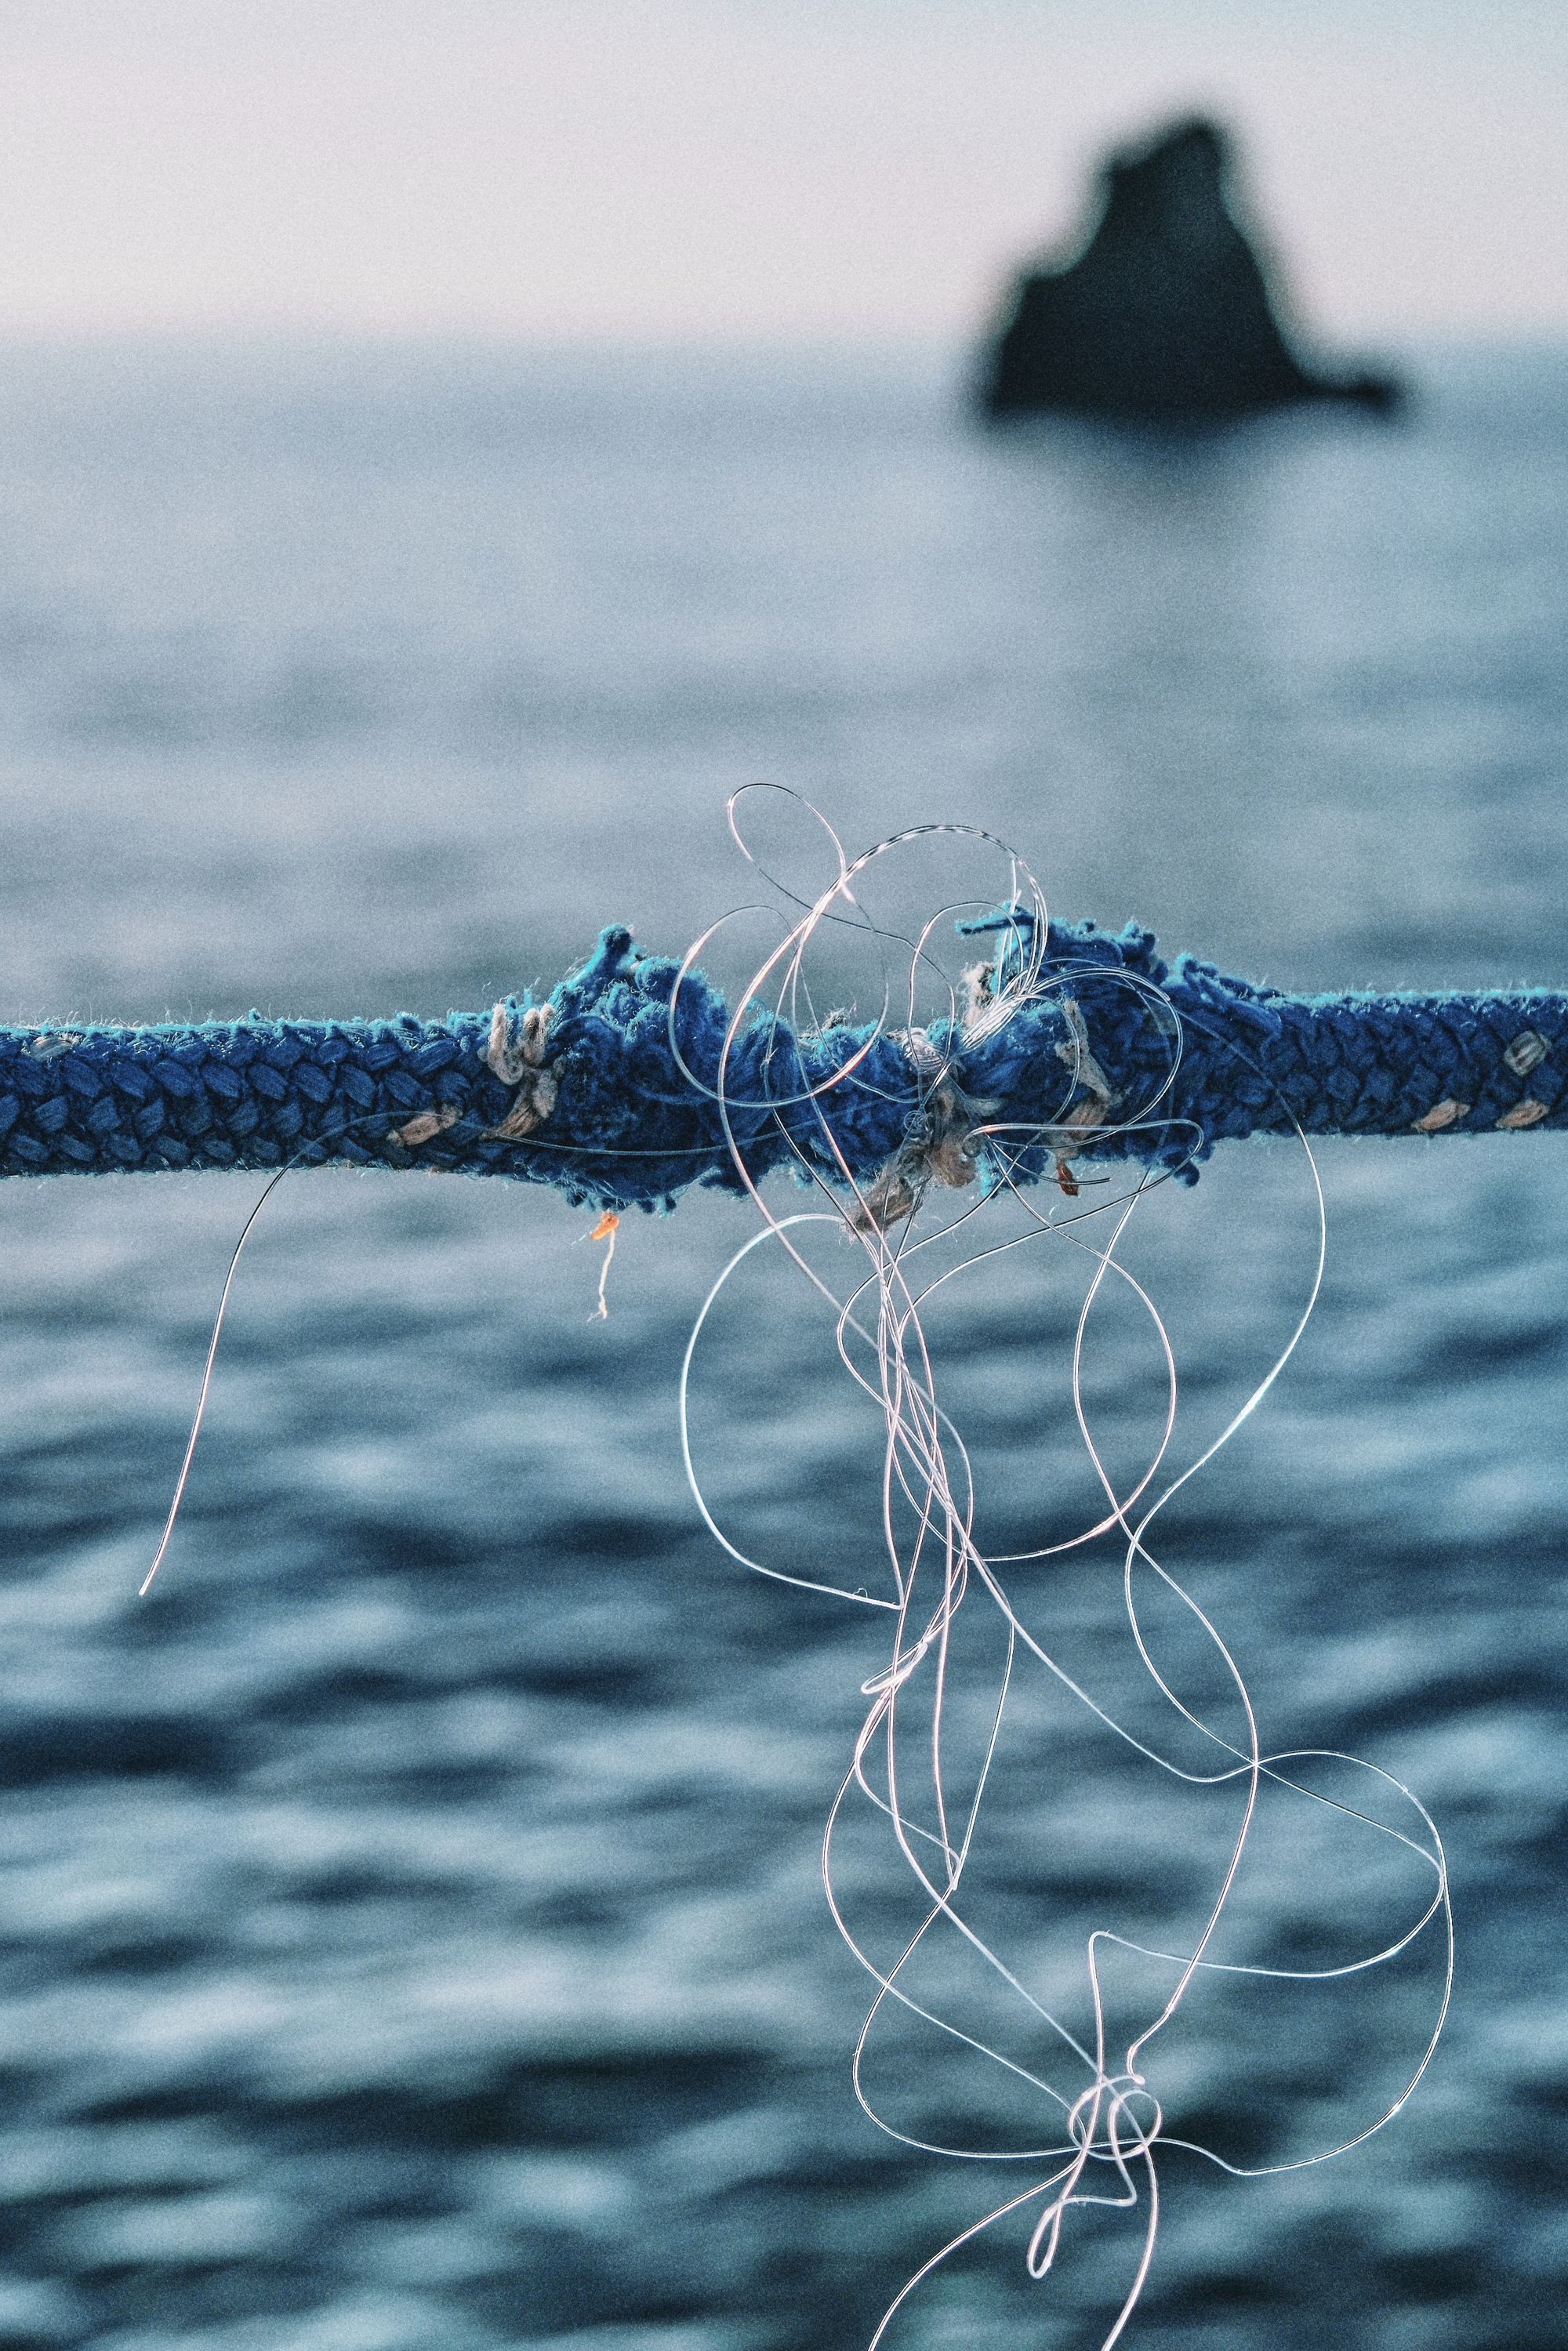 Image of a rope starting to break apart. 